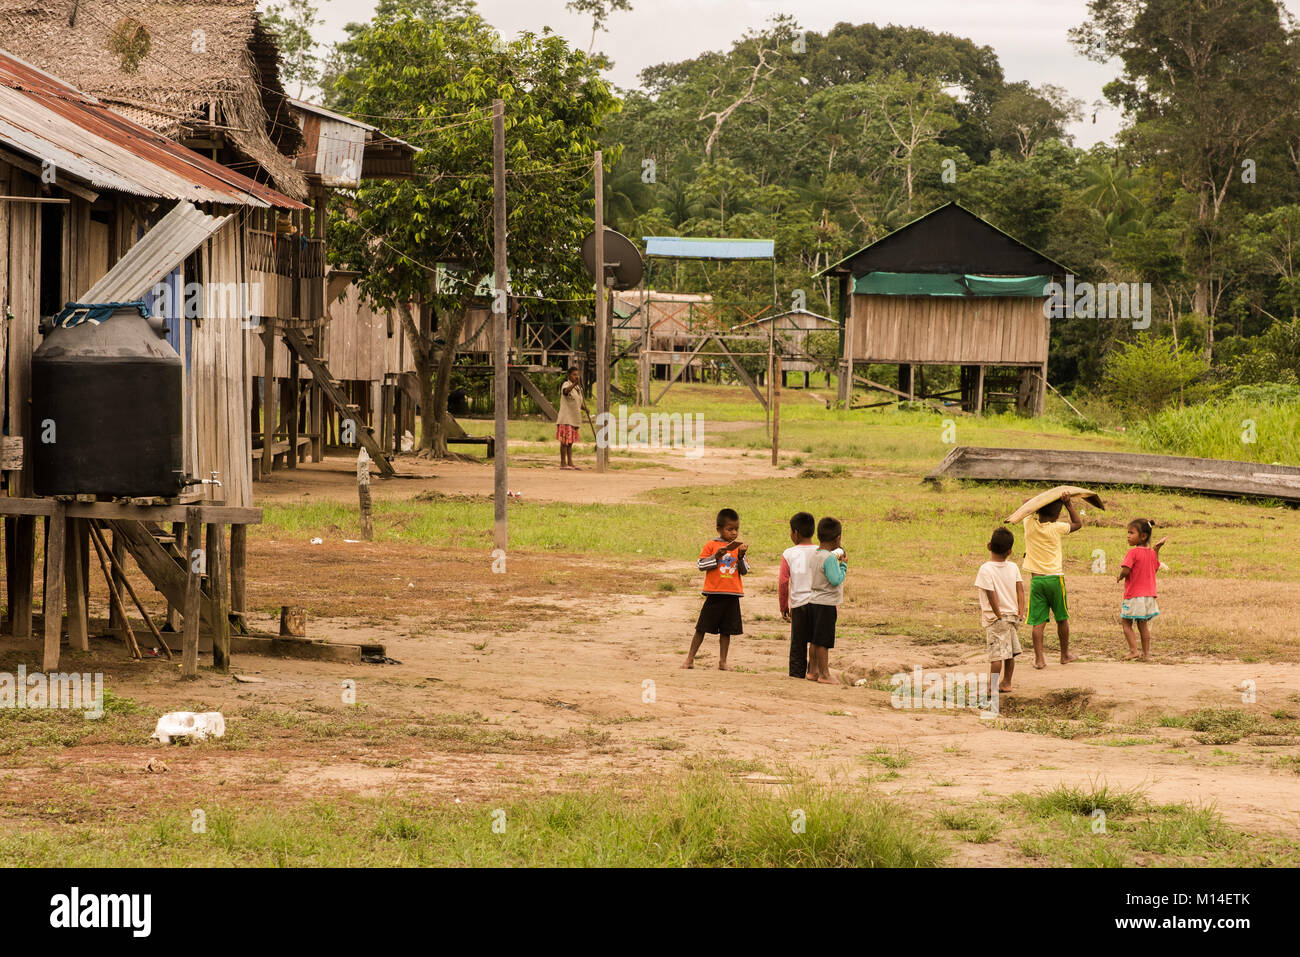 A typical scene in an Amazonian village in the Amazon basin. Stock Photo